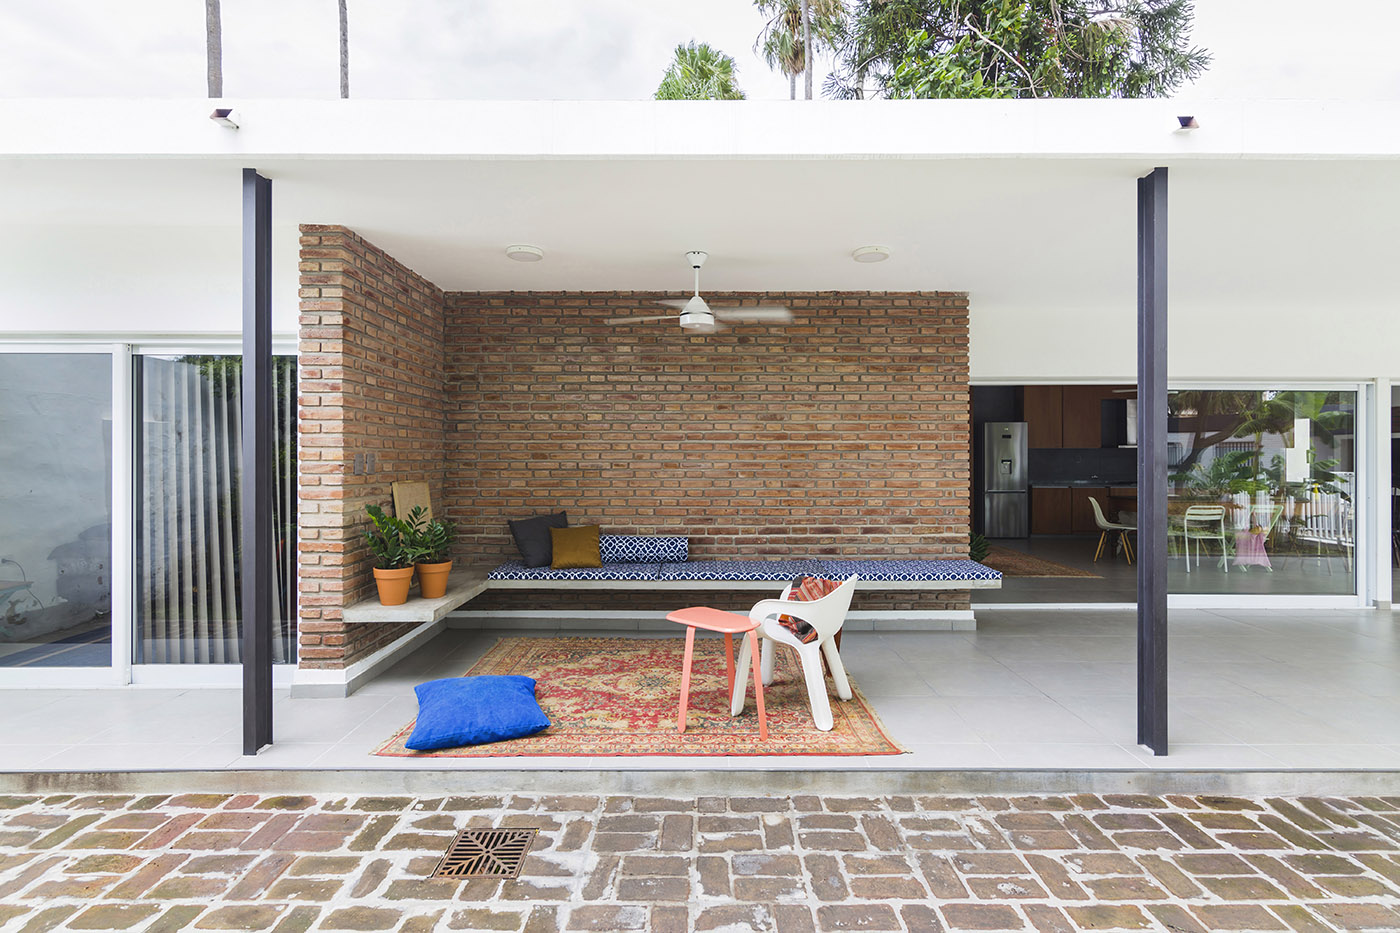 El guincho, extension of a family home designed to share moments together both indoors and outdoors